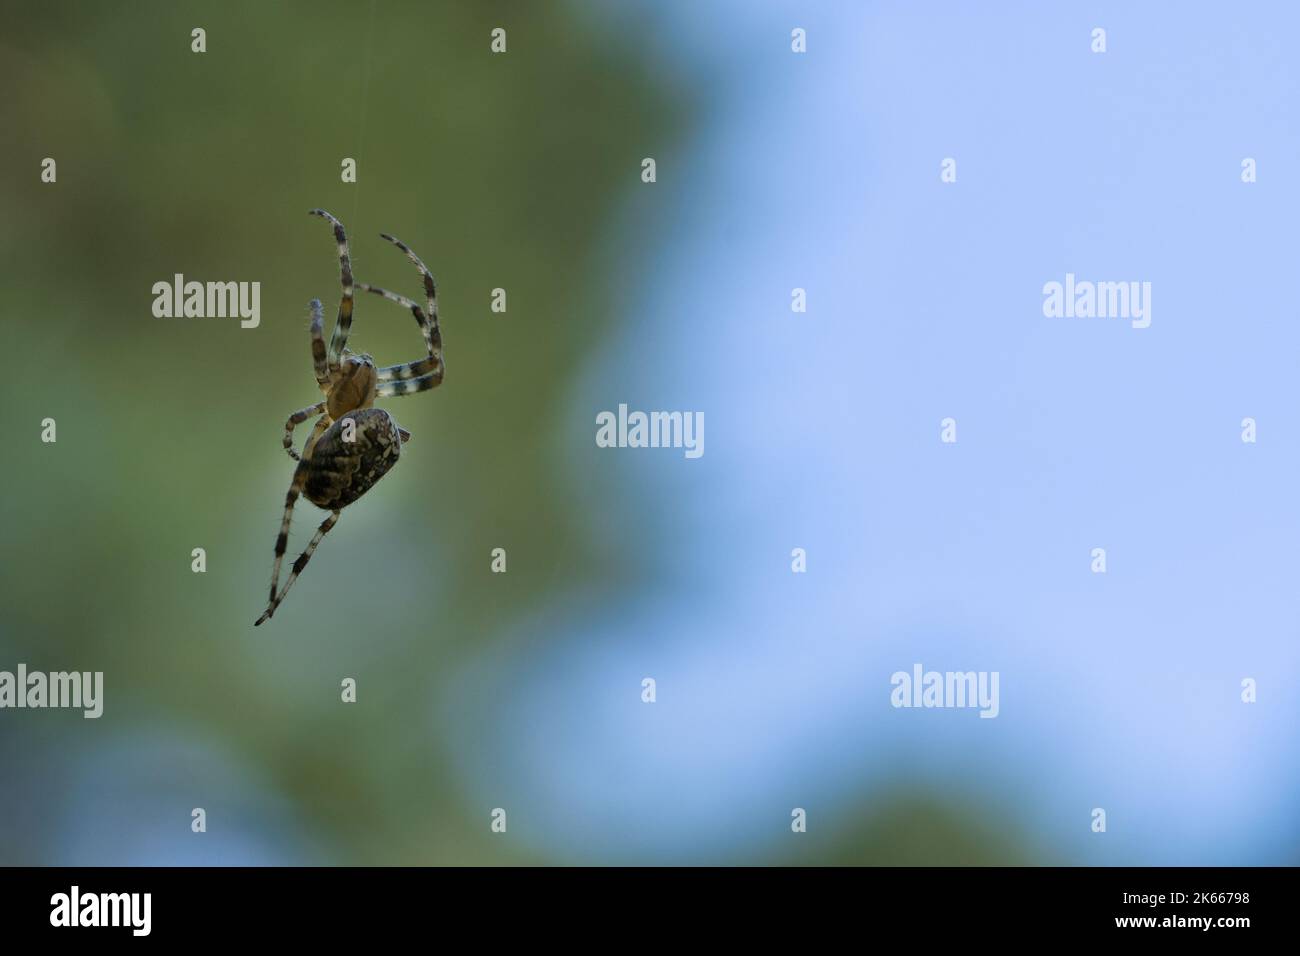 Cross spider crawling on a spider thread. Blurred background. A useful hunter among insects. Arachnid. Animal photo from the wild. Stock Photo